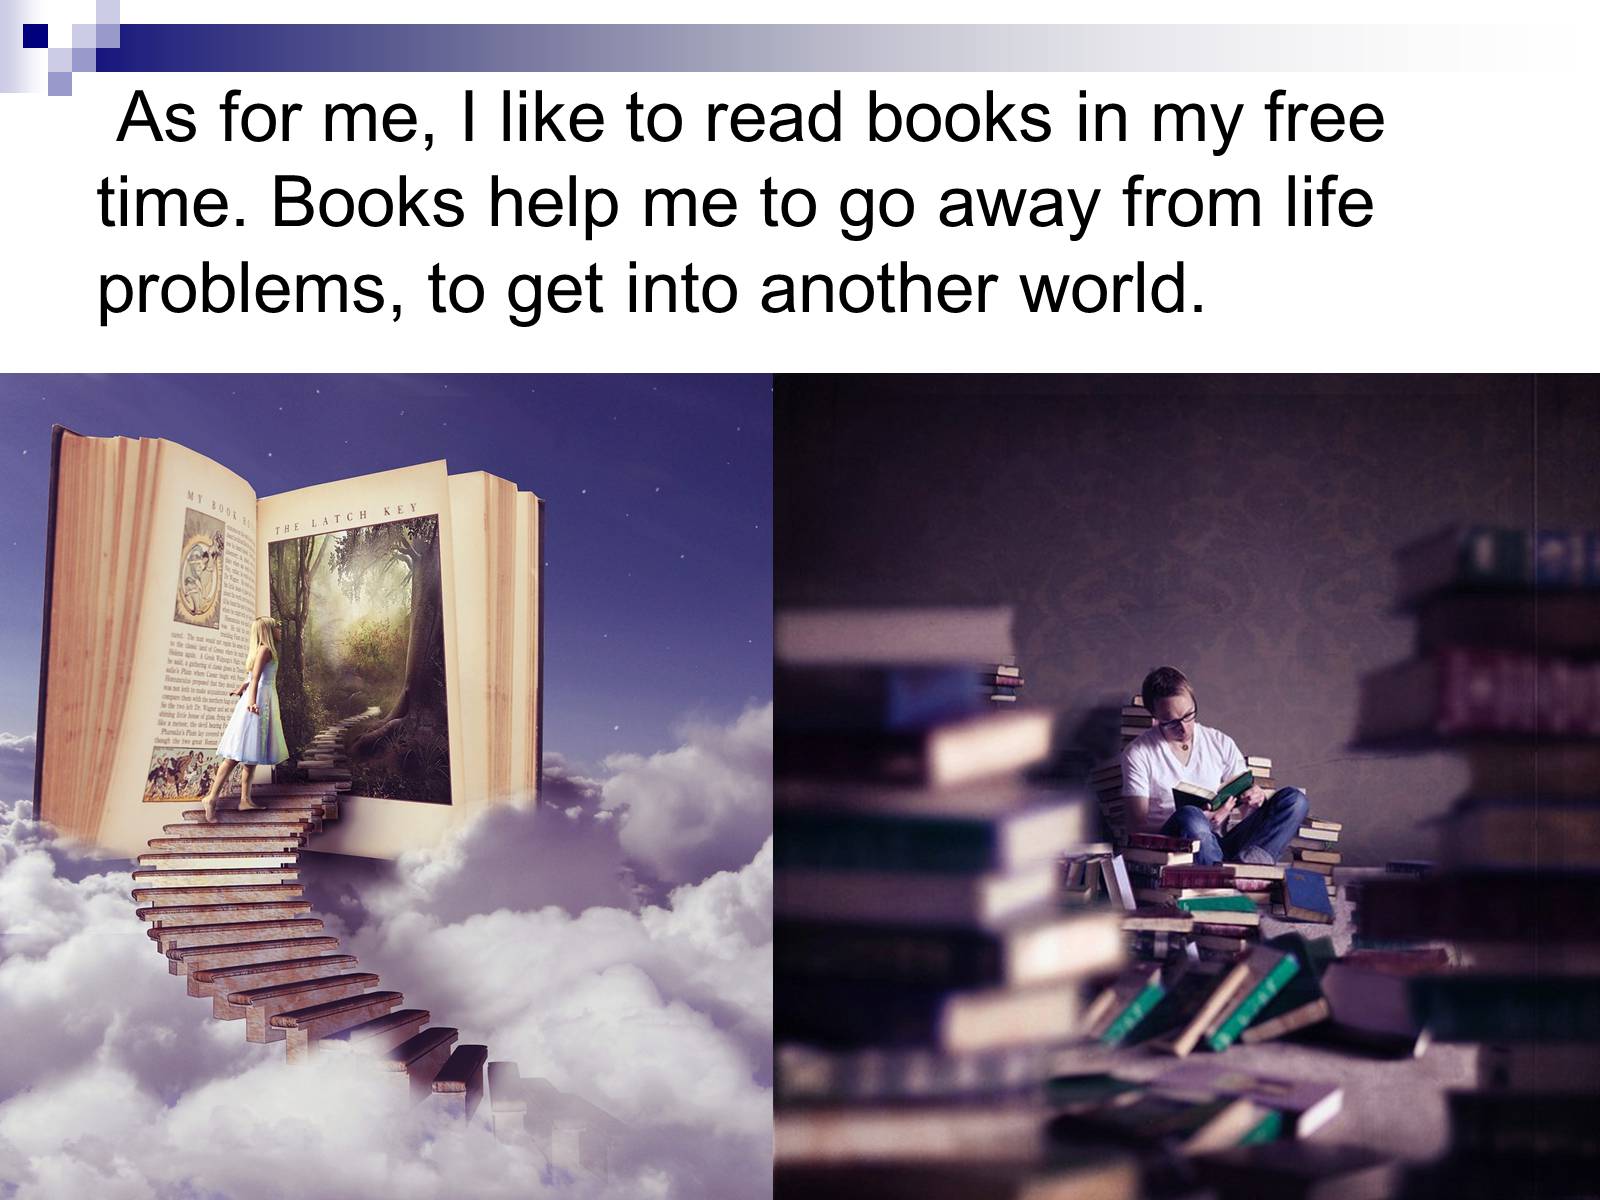 Books are in my life